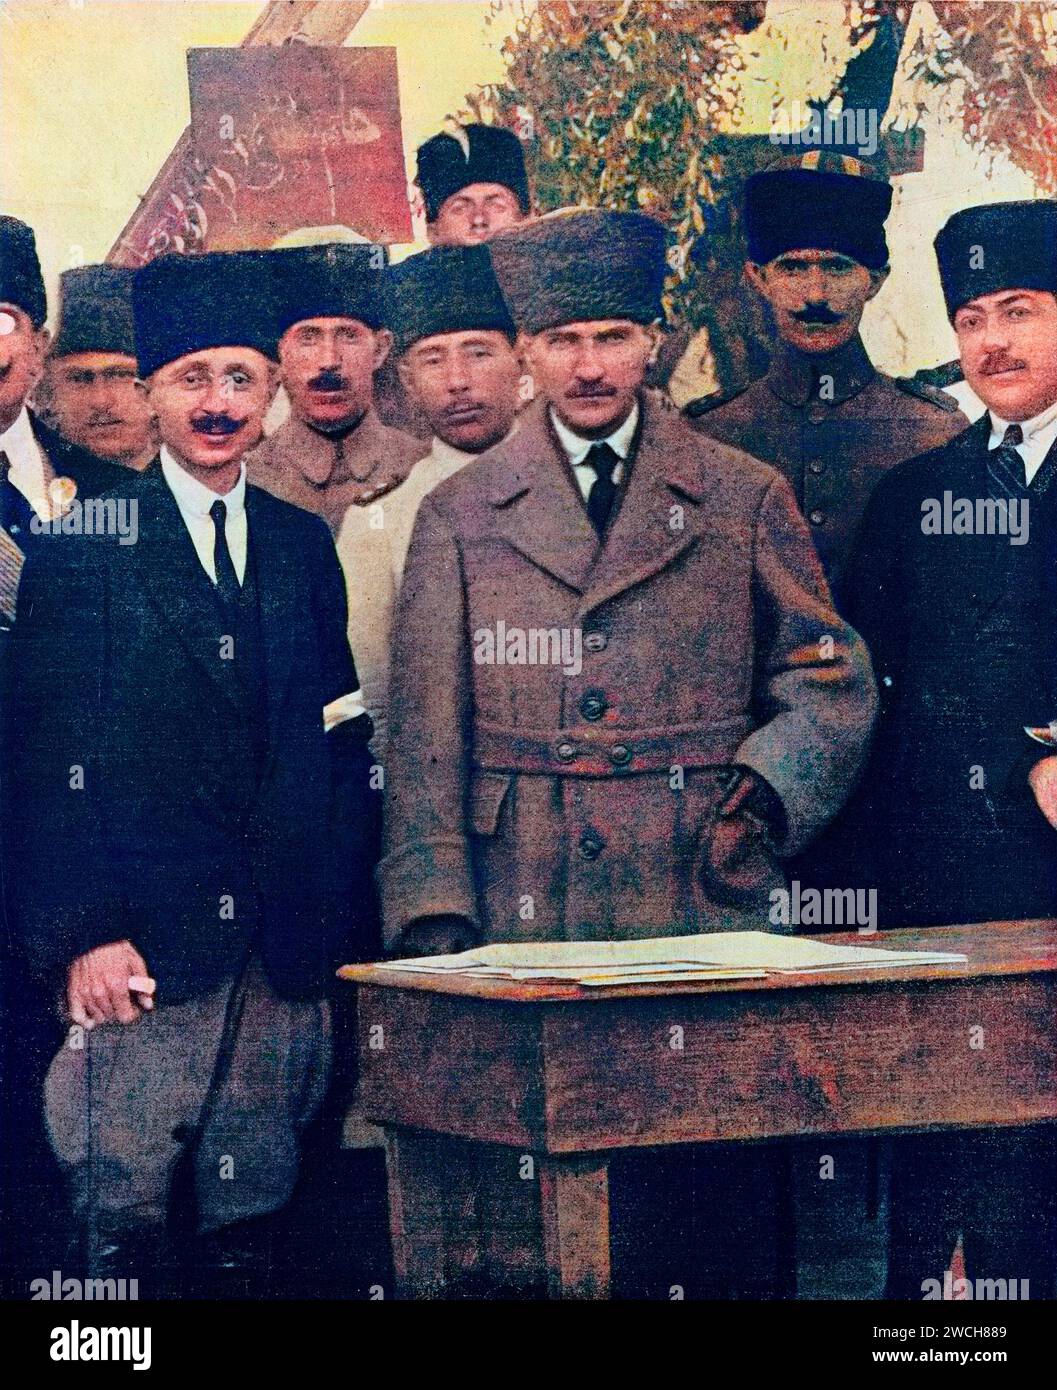 Turkish army officer and politician Mustafa Kemal Ataturk with his chief of staff, Turkey, 1922 - later colored photo  - Later coloring. Stock Photo